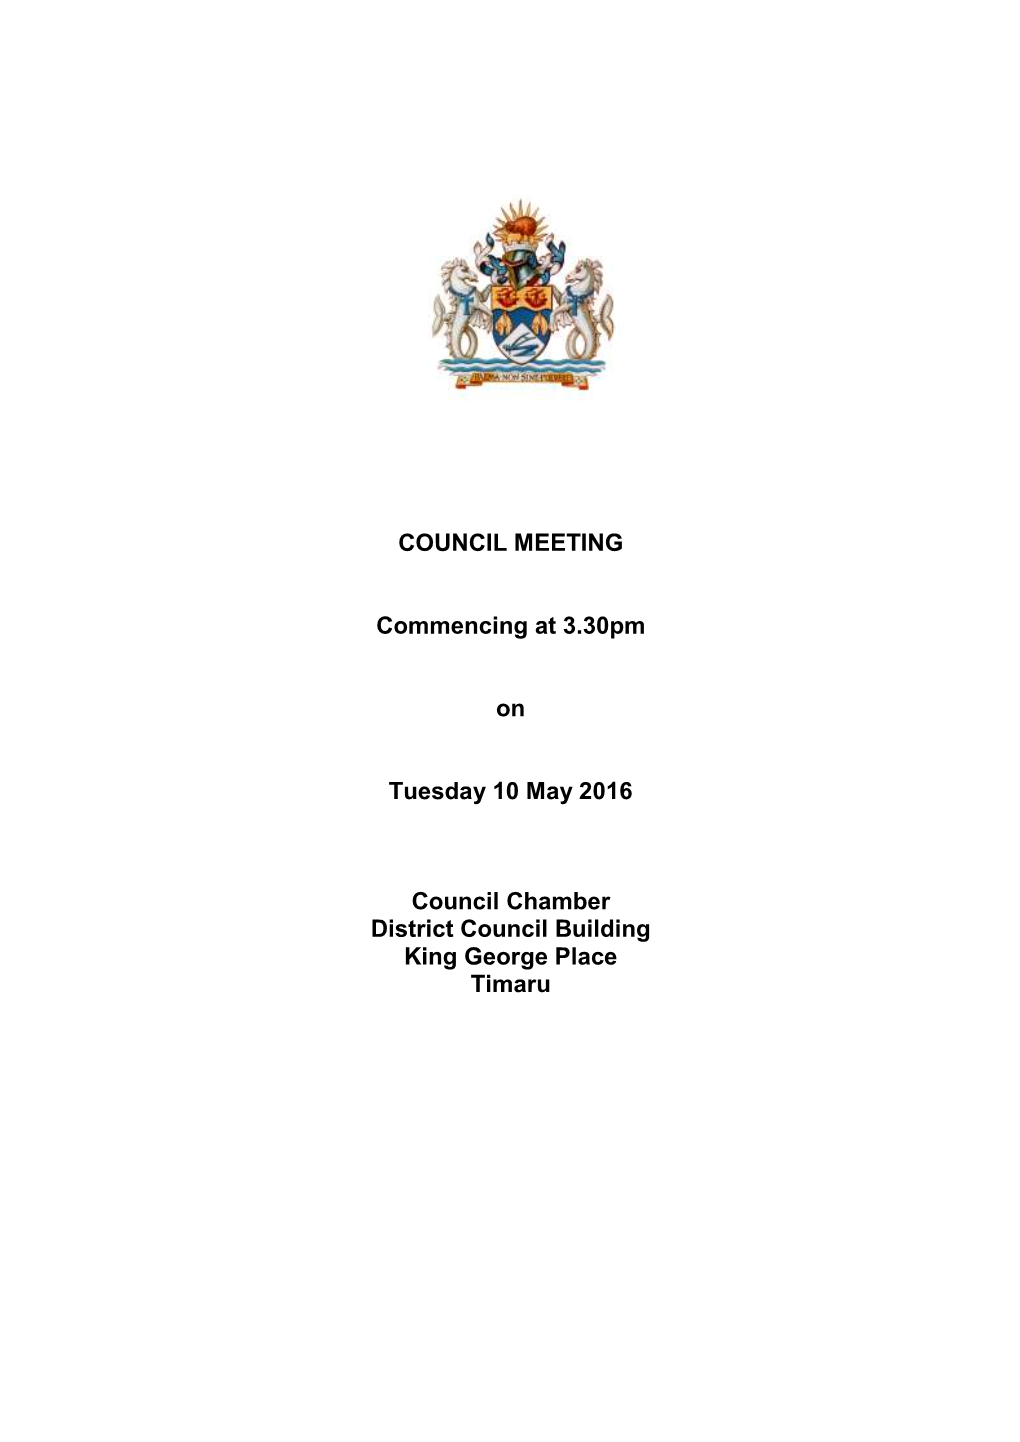 COUNCIL MEETING Commencing at 3.30Pm on Tuesday 10 May 2016